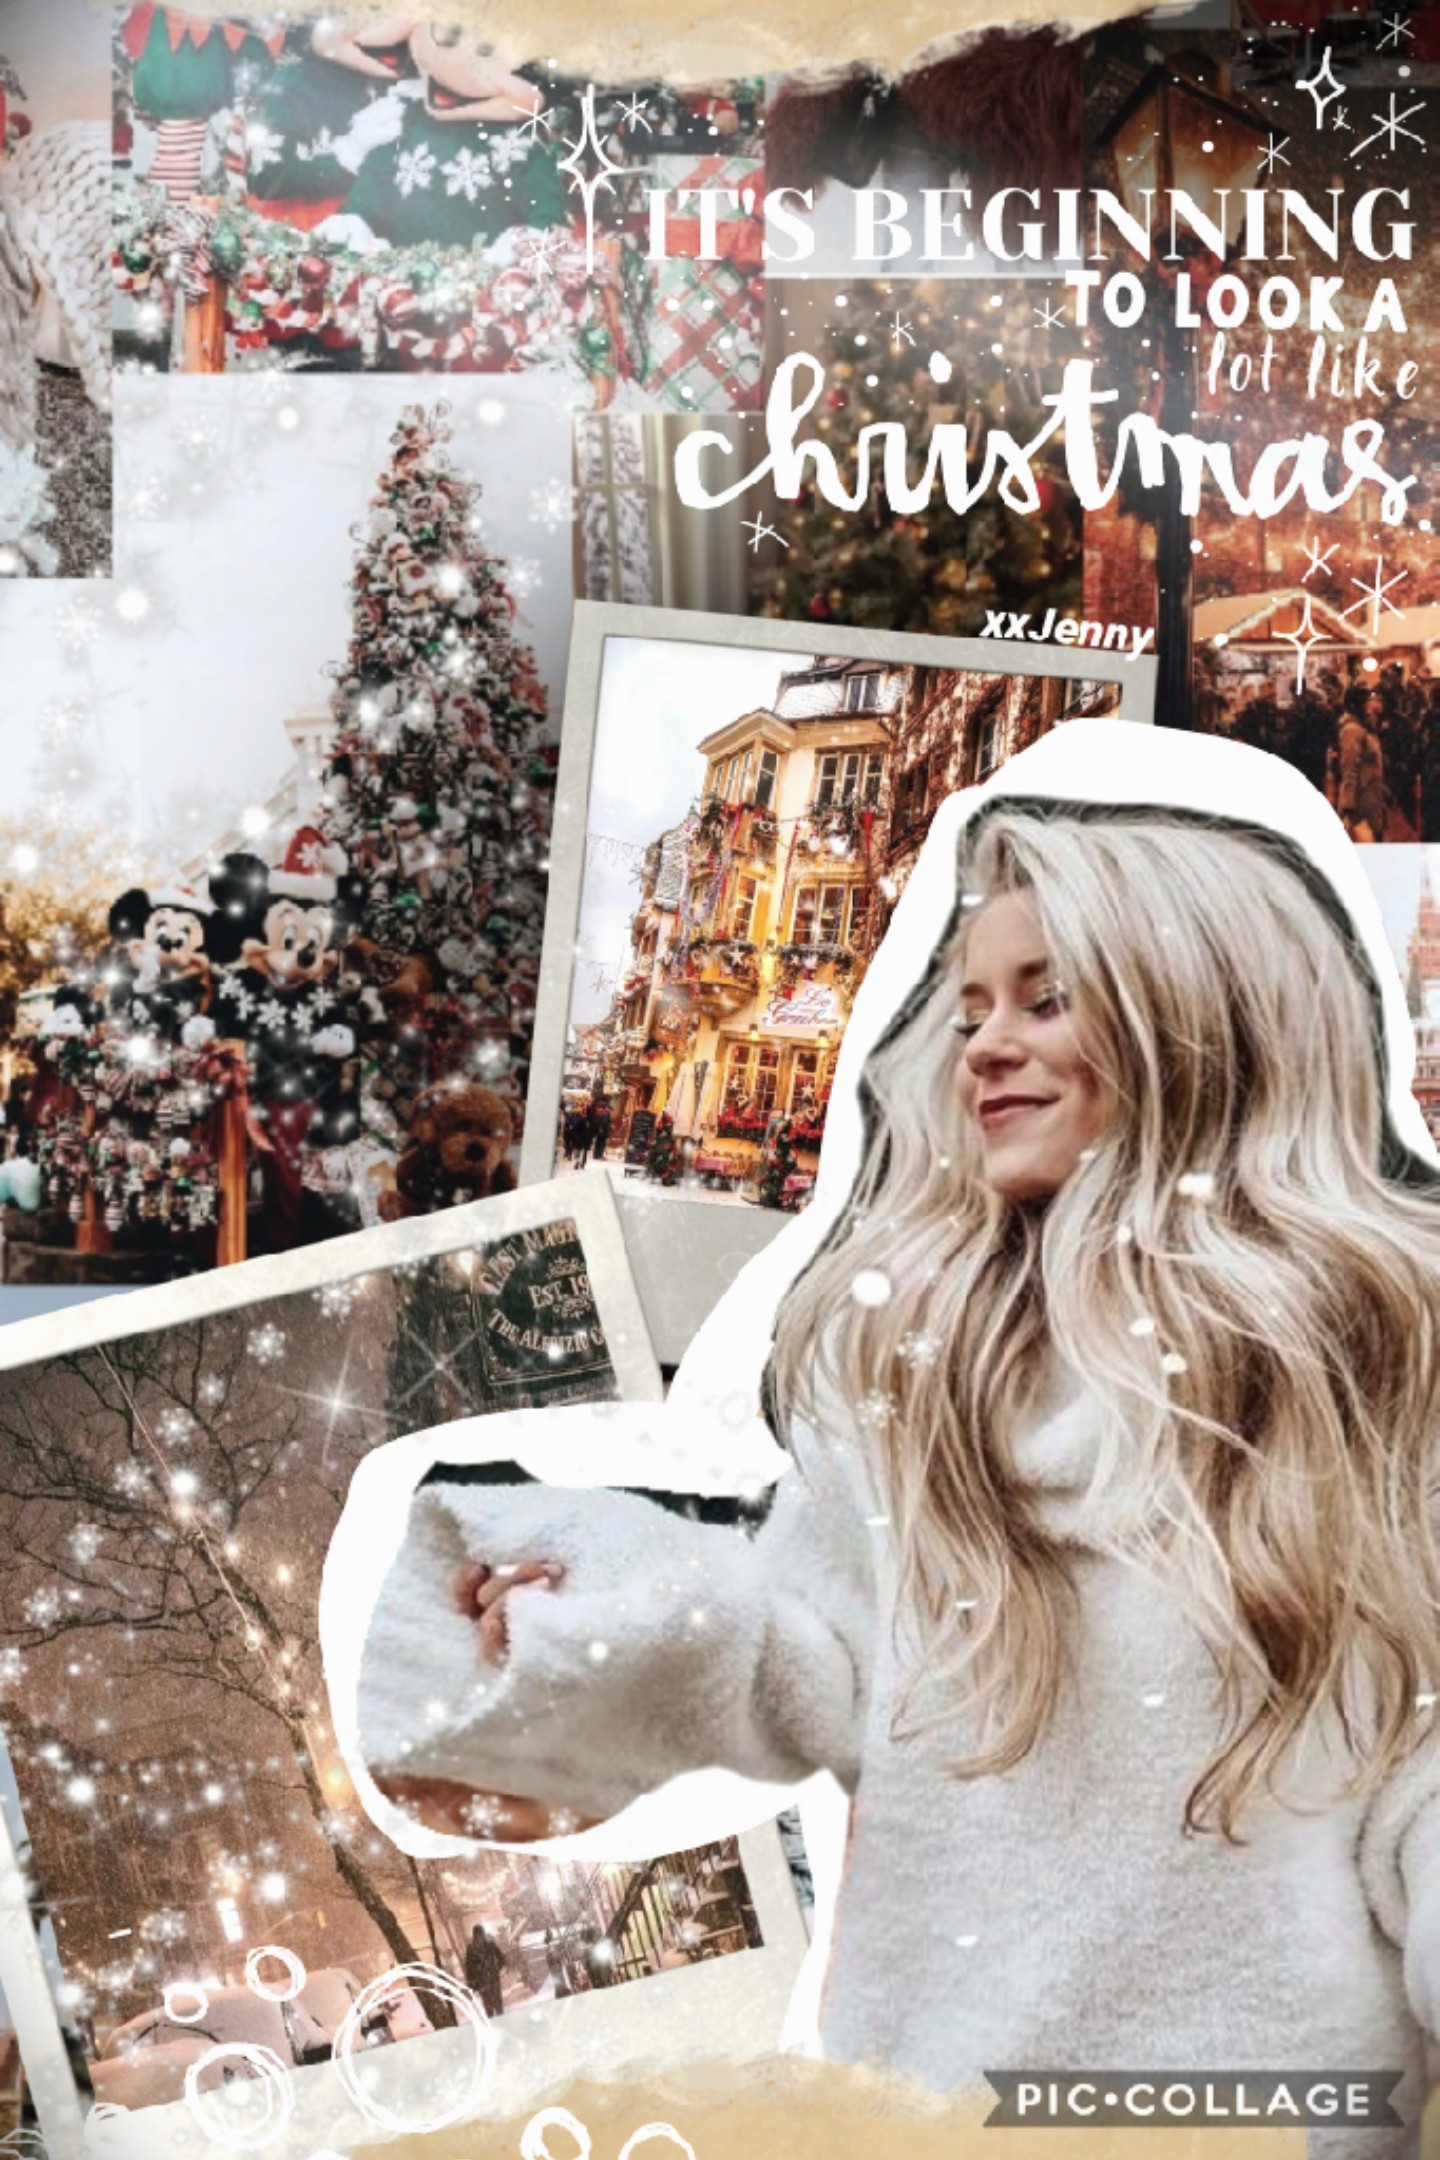 Here is a christmas post for the piccollage contest!! 🎄✨💛